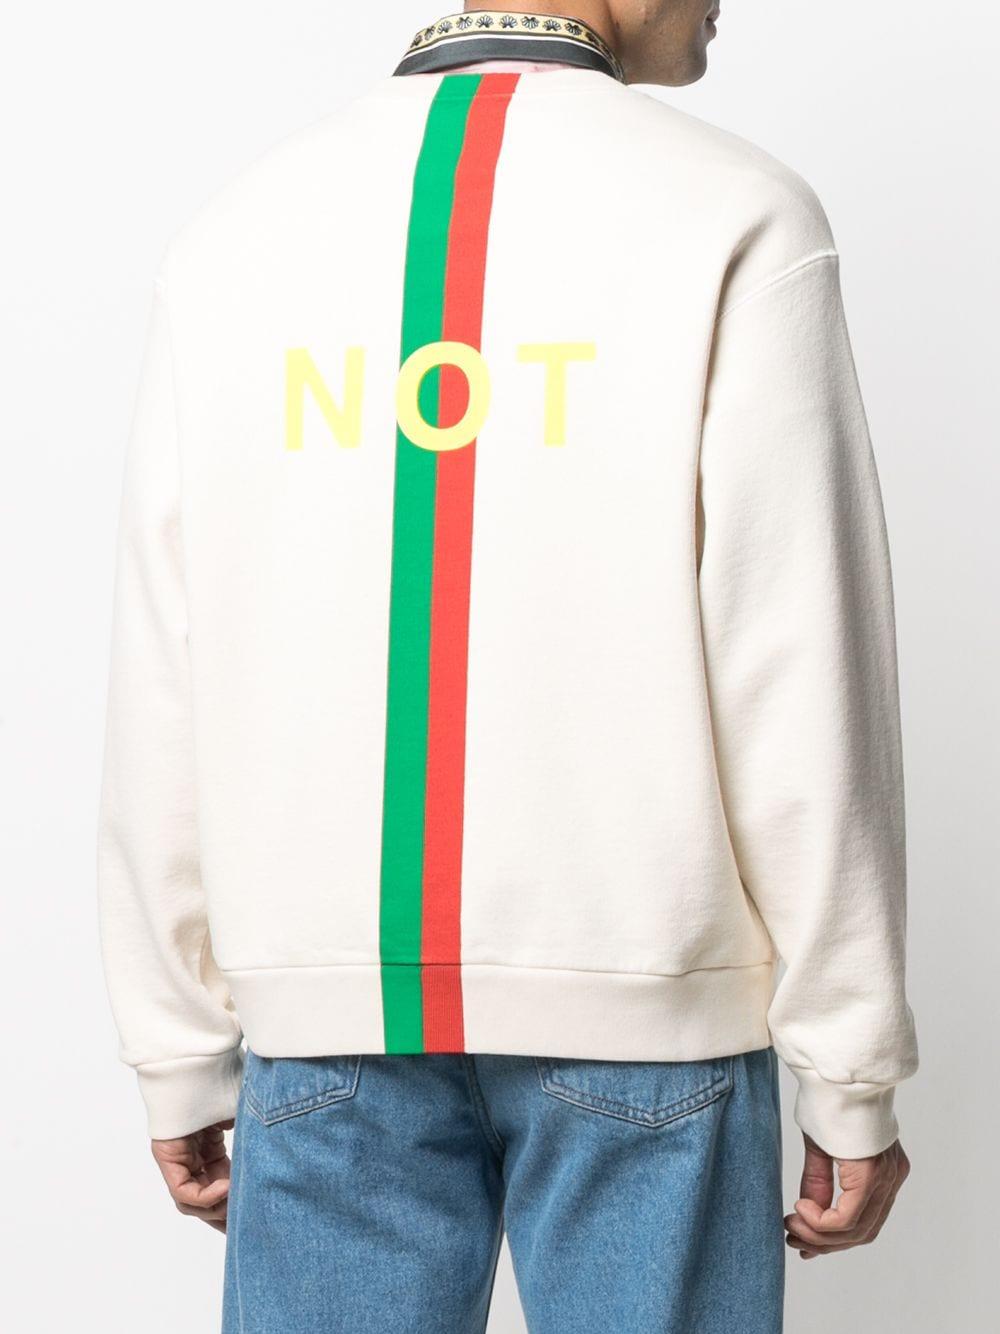 Gucci Men’s “Not Fake” collection Size medium 